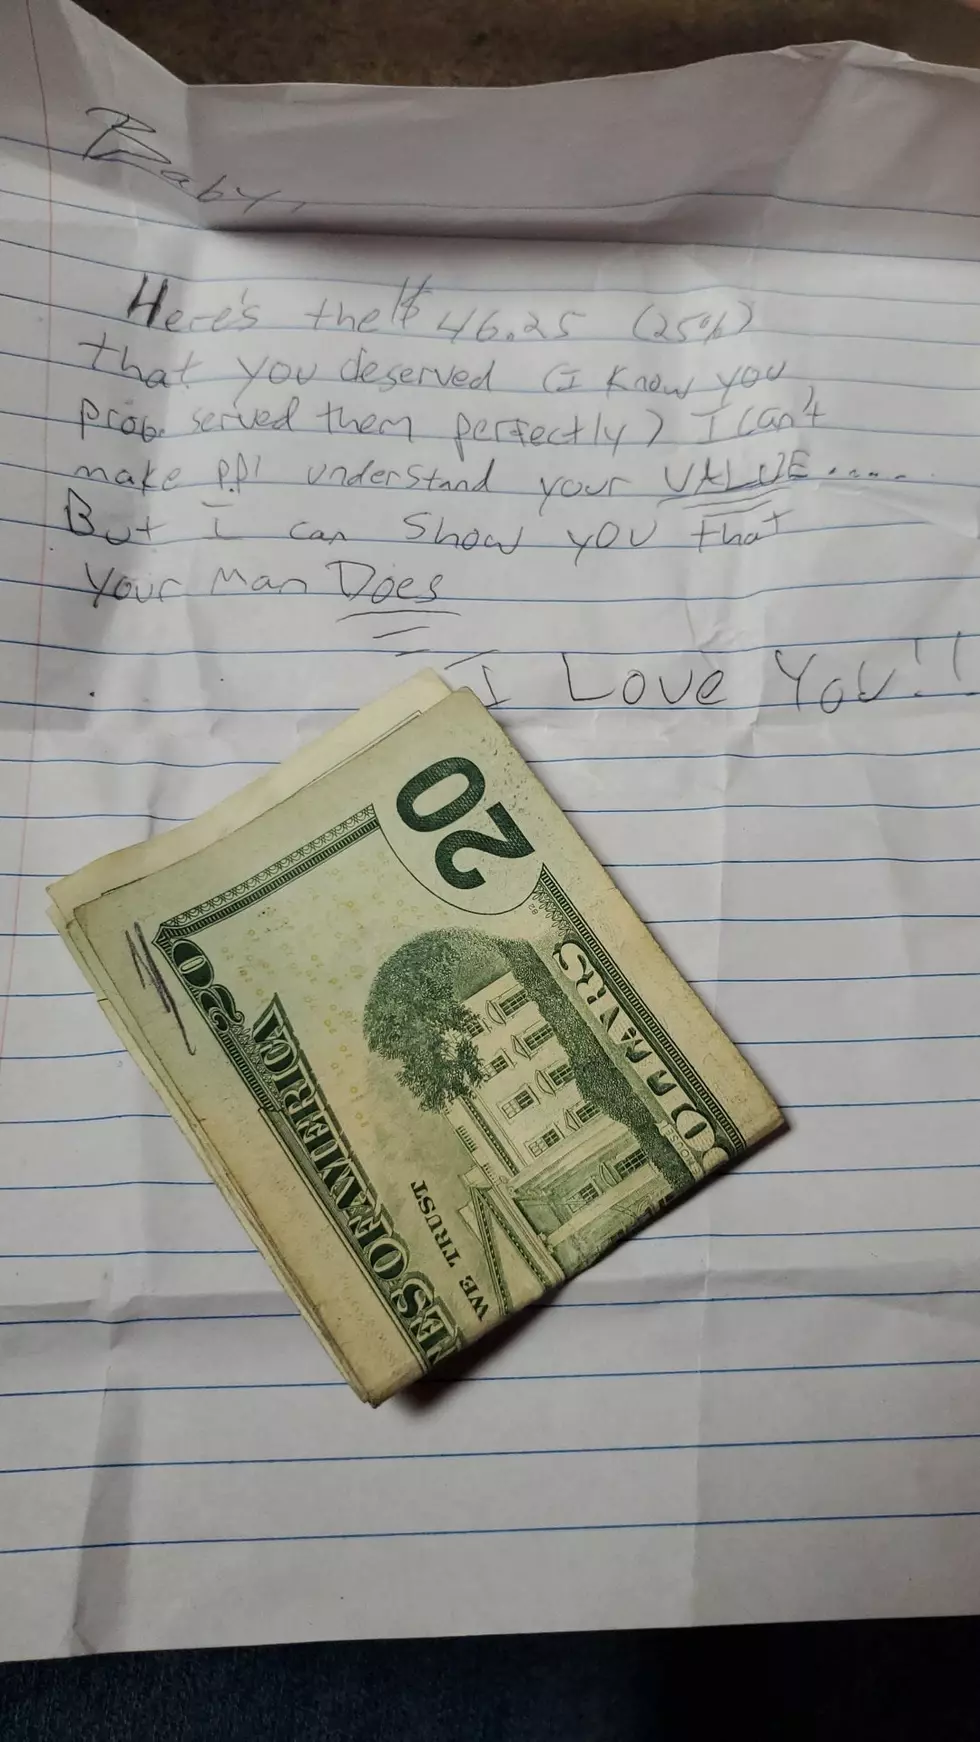 Waitress Stiffed on Tip Receives Gift from Her Own Christmas Angel